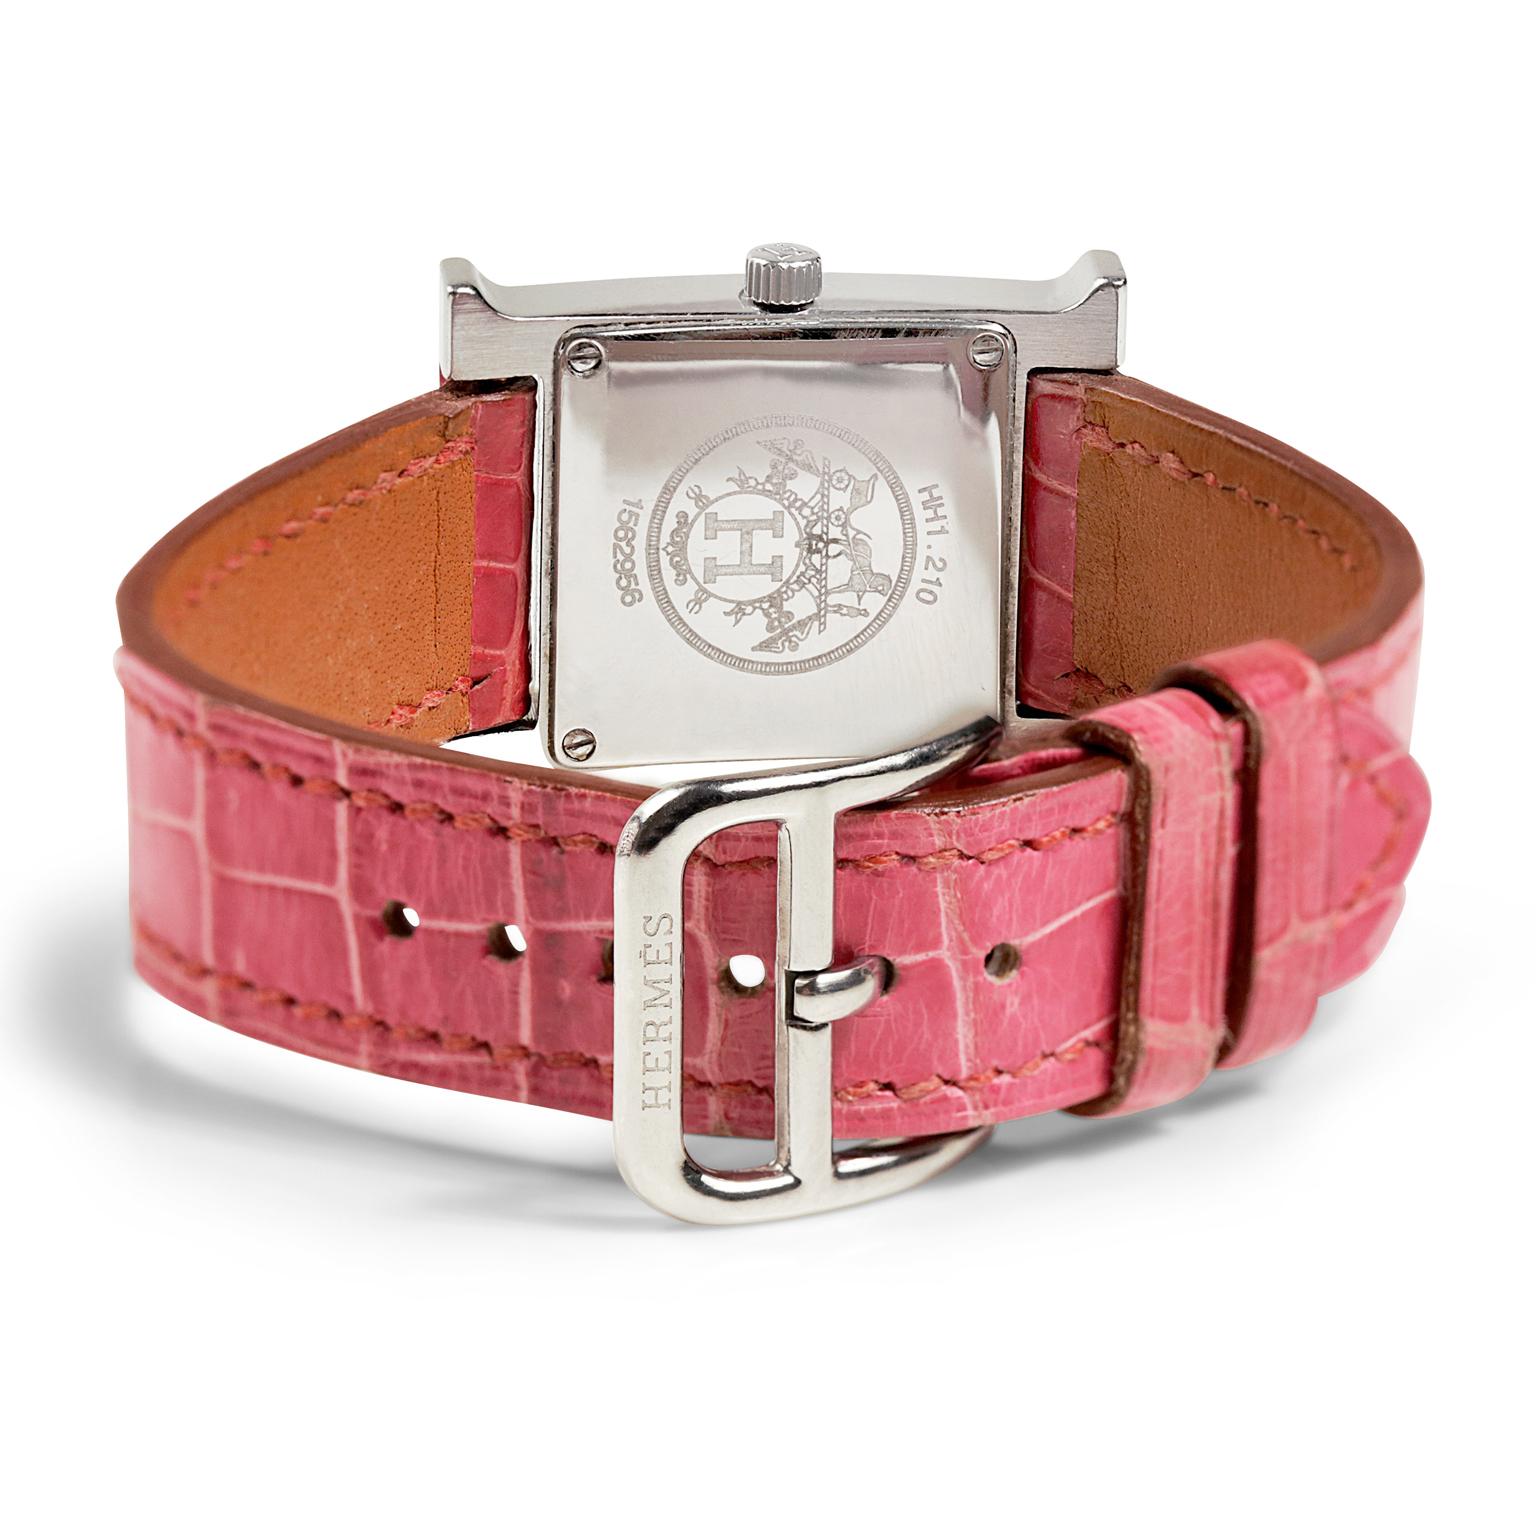 This authentic Hermès Stainless Steel Heure H Watch is in very good overall condition.  Stainless steel casing, pink porosus crocodile band.  
 
